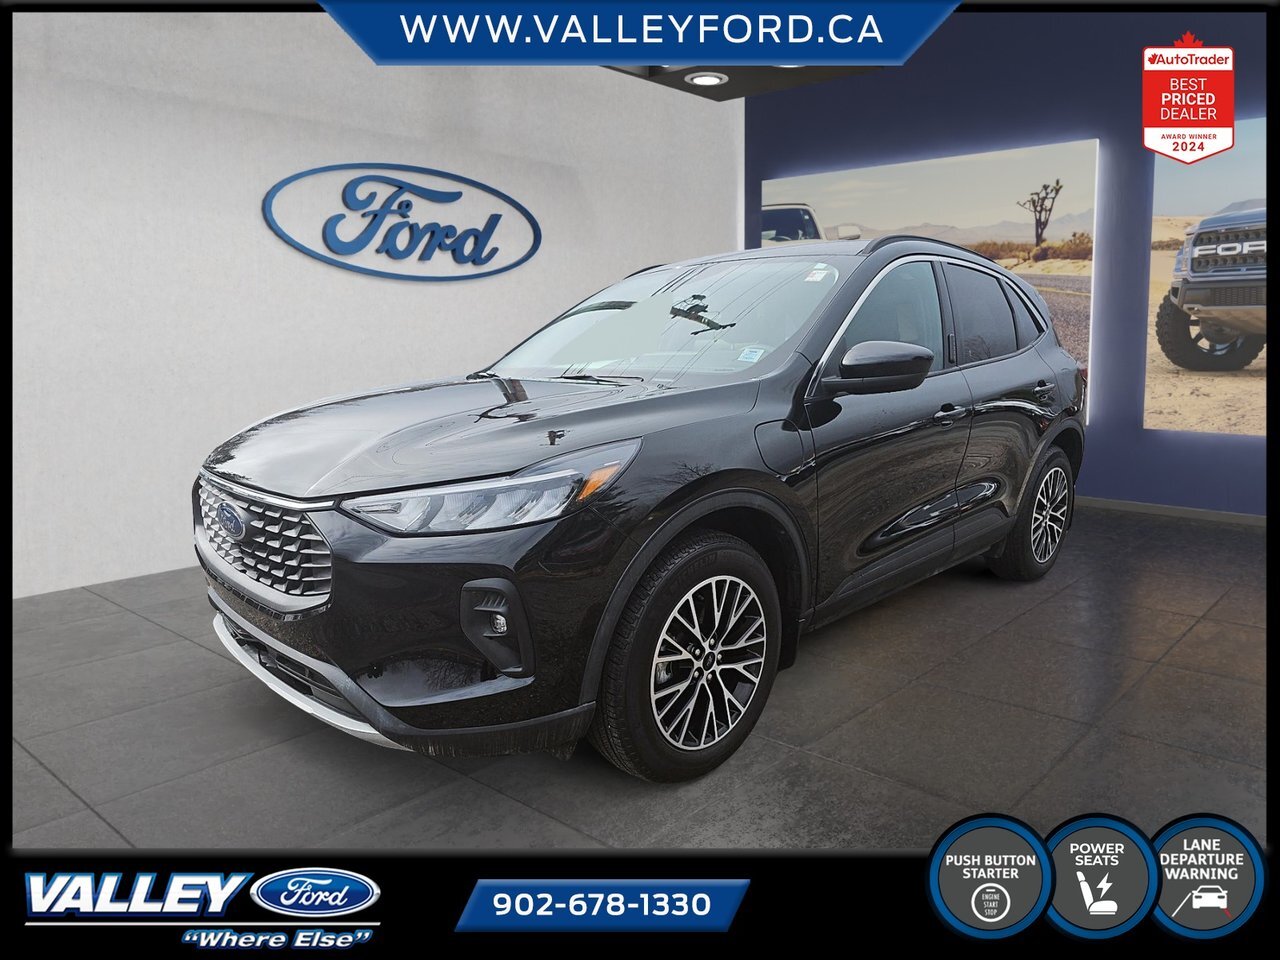 2023 Ford Escape PHEV $1000 Rebate Available